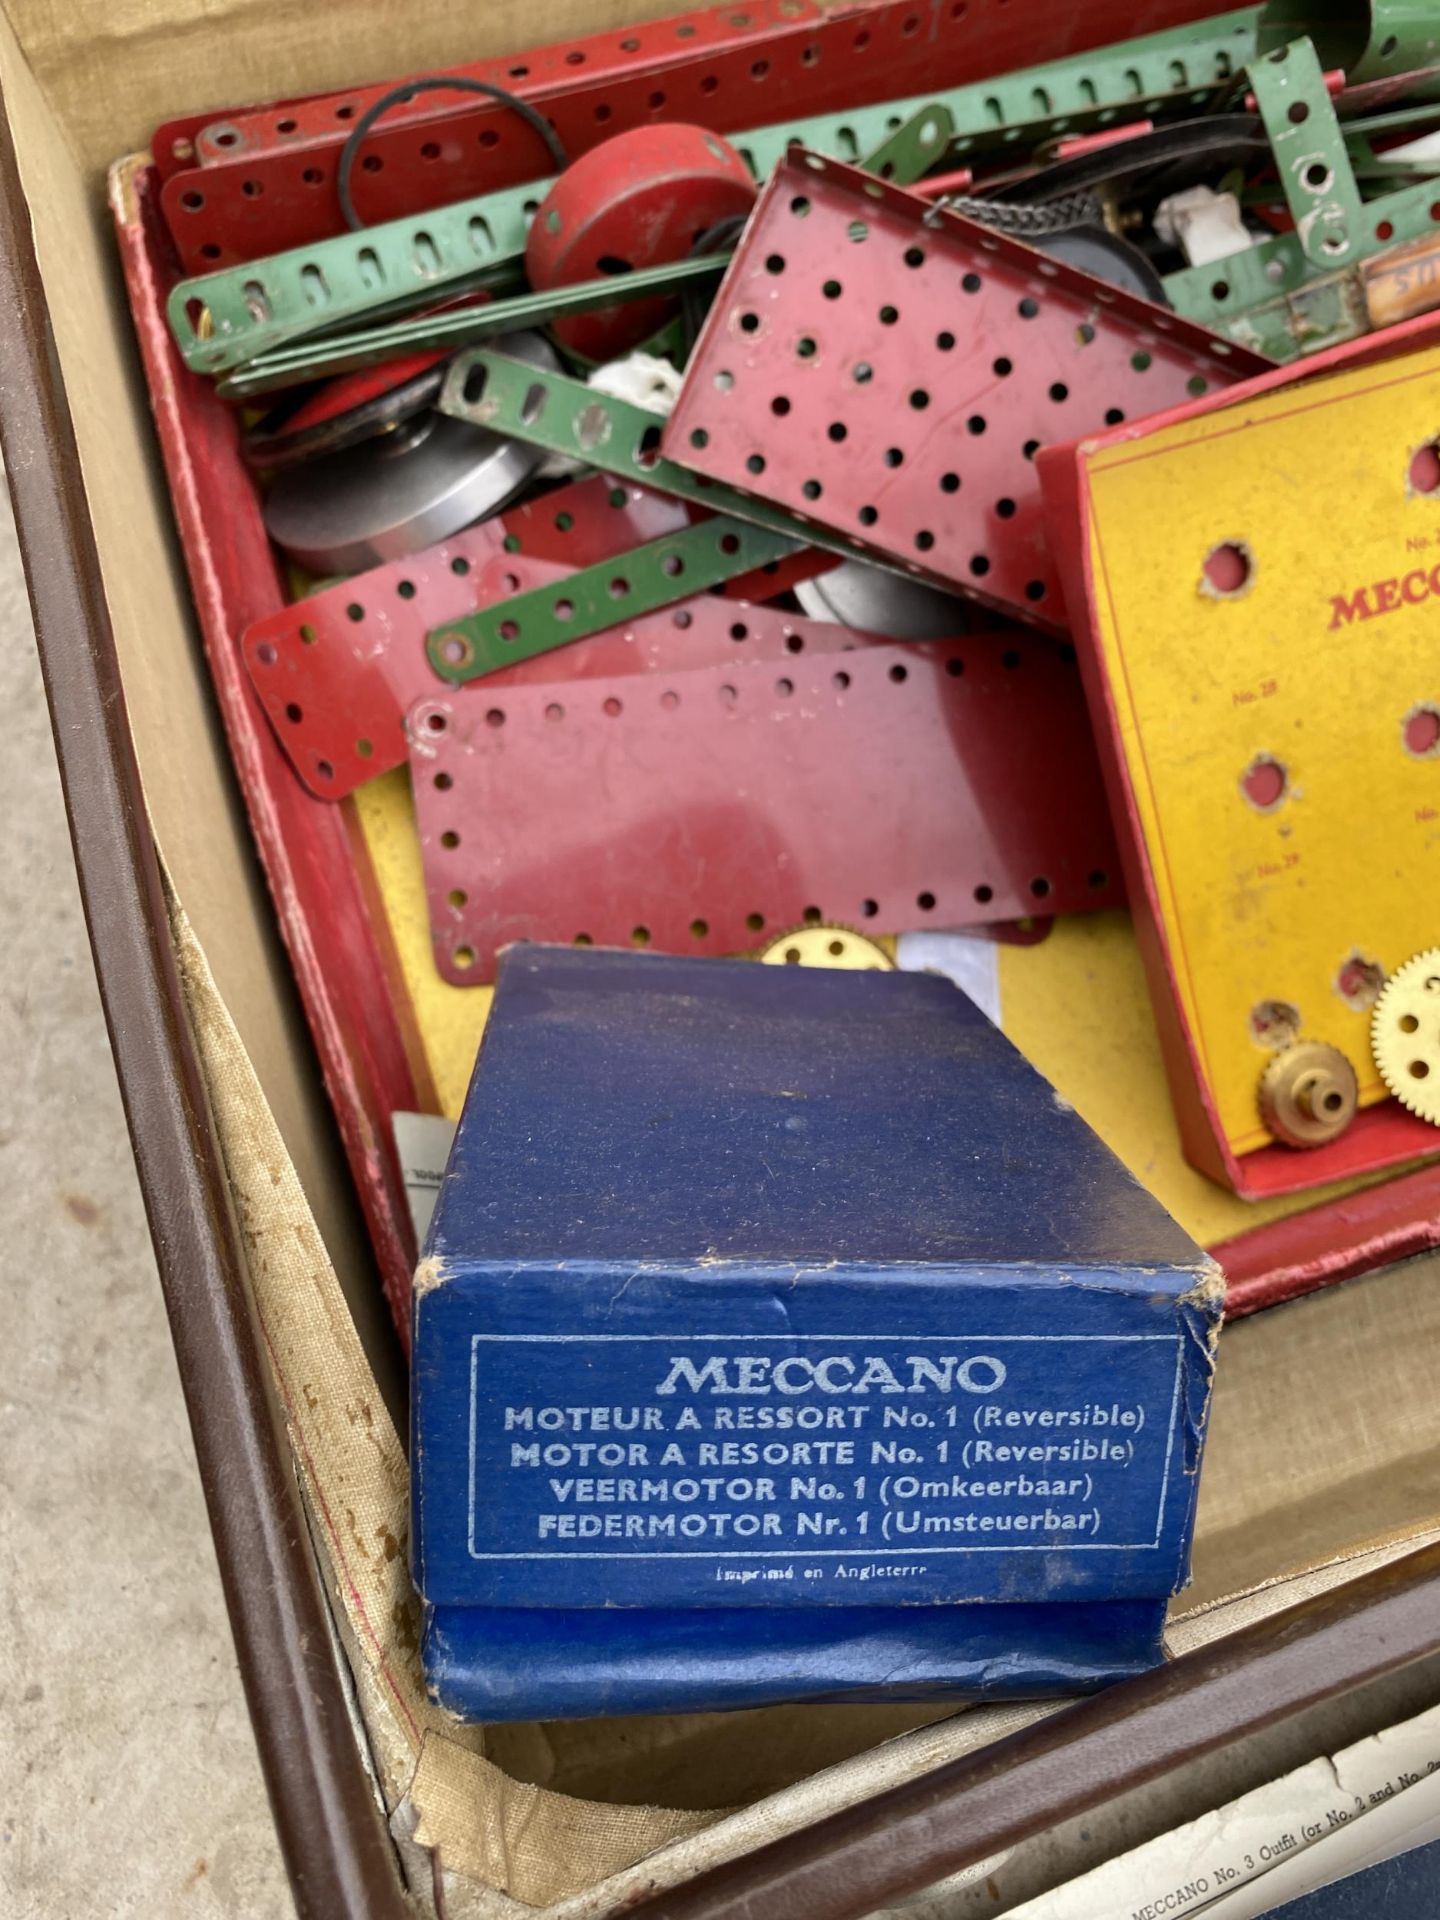 A VINTAGE TRAVEL CASE CONTAINING AN ASSORTMENT OF MERCANO - Image 3 of 5